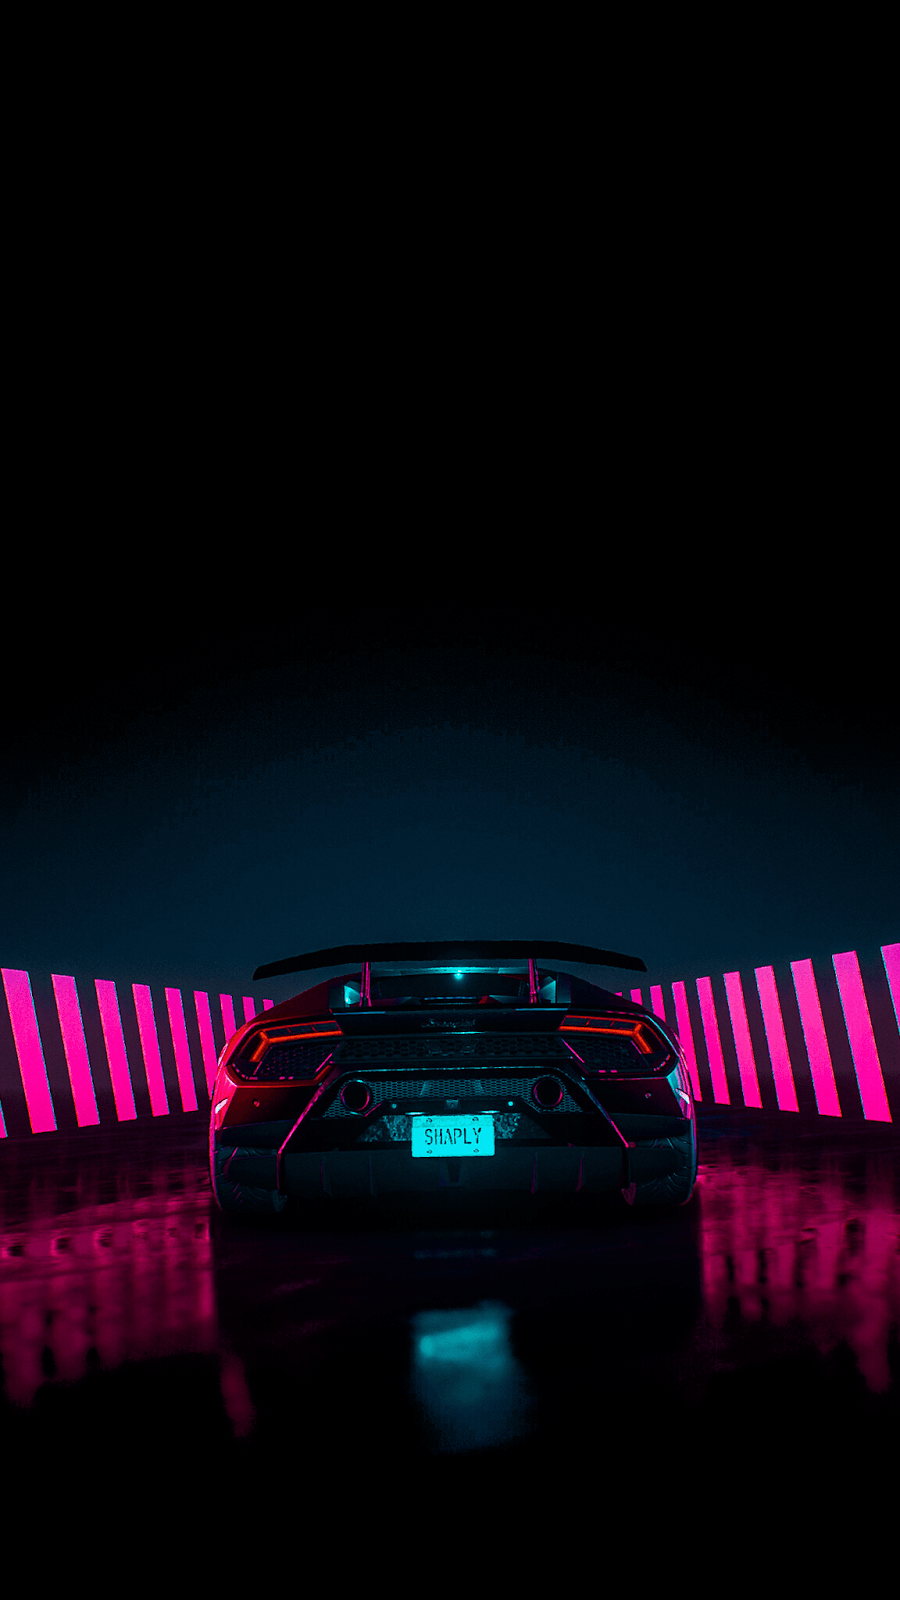 4K Mobile Cars Wallpapers